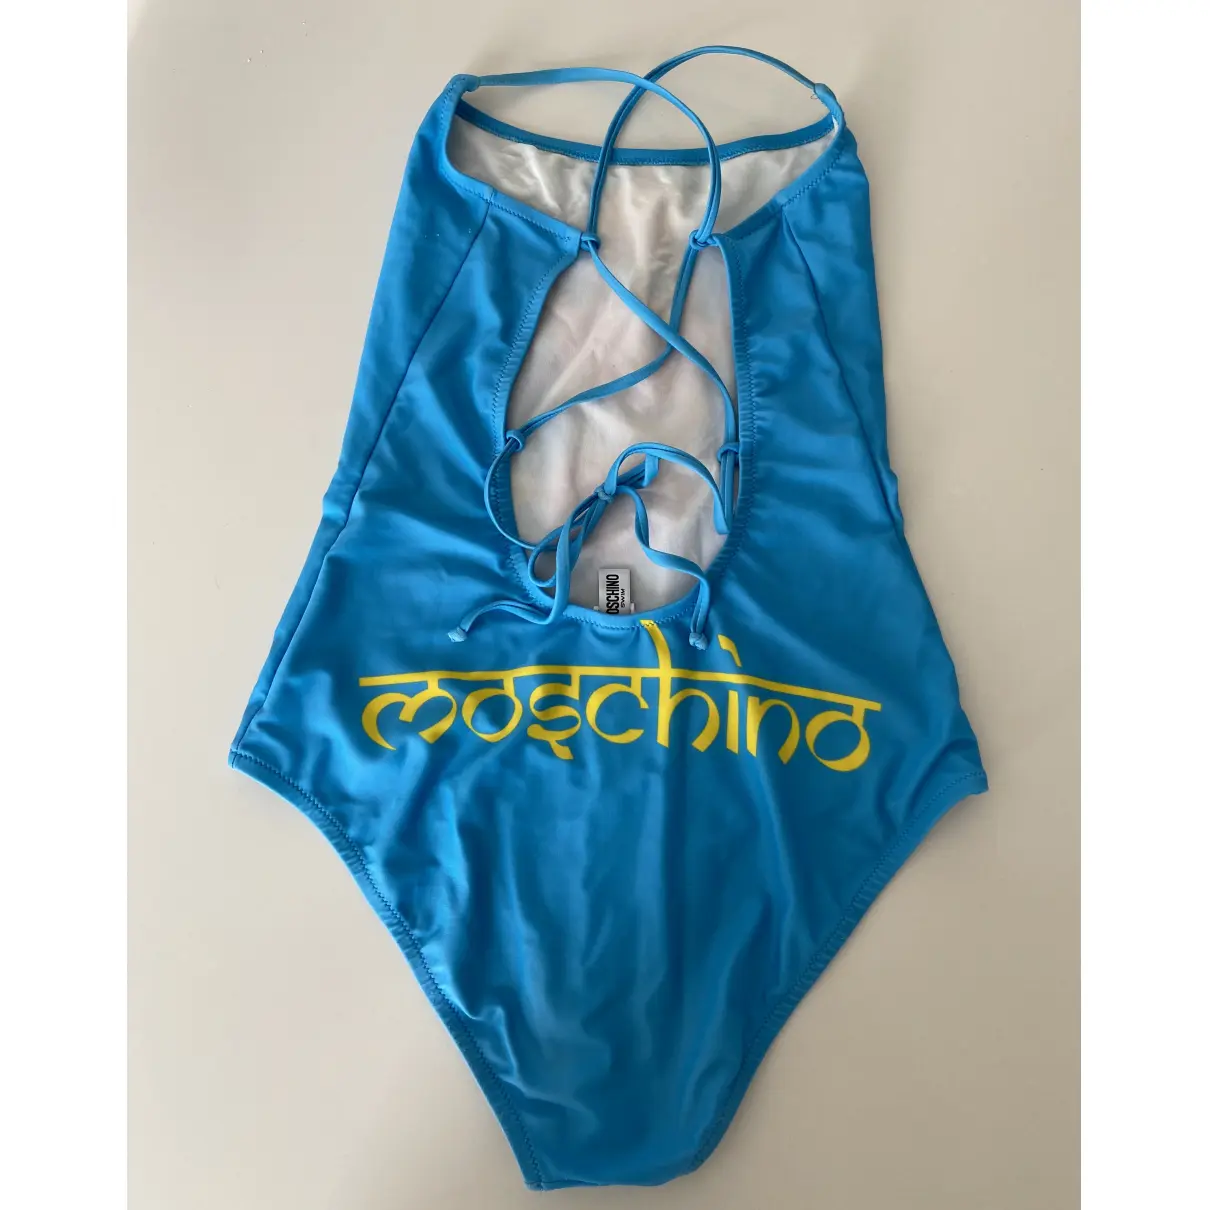 Buy Moschino One-piece swimsuit online